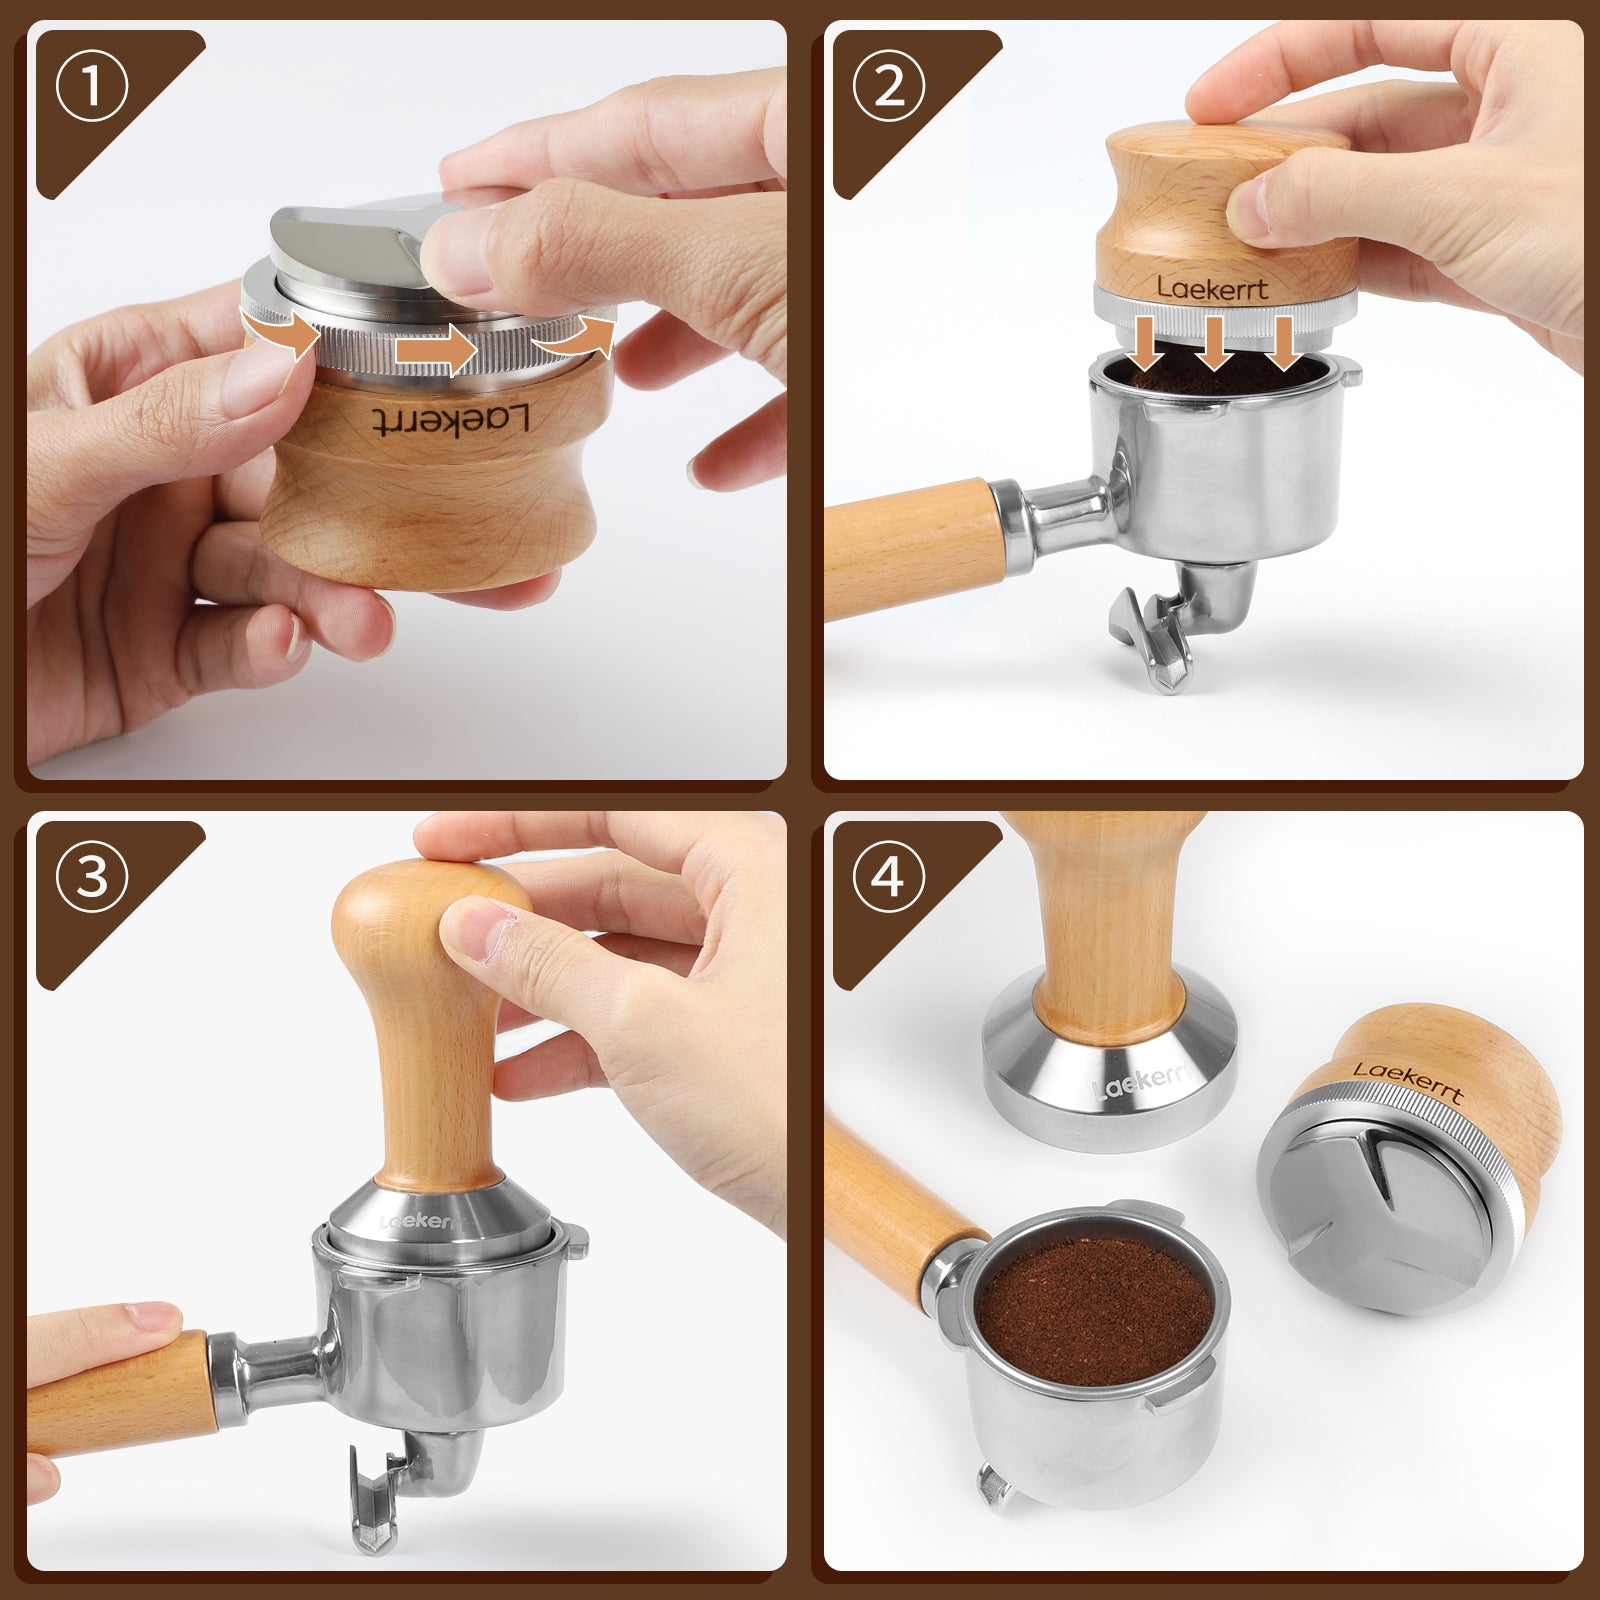 Coffee Tamper 51mm Espresso Press With Mat 304 Stainless Steel Base Wooden  Handle For Coffee Grounds Barista Espresso Machines Accessory Wooden (1pc